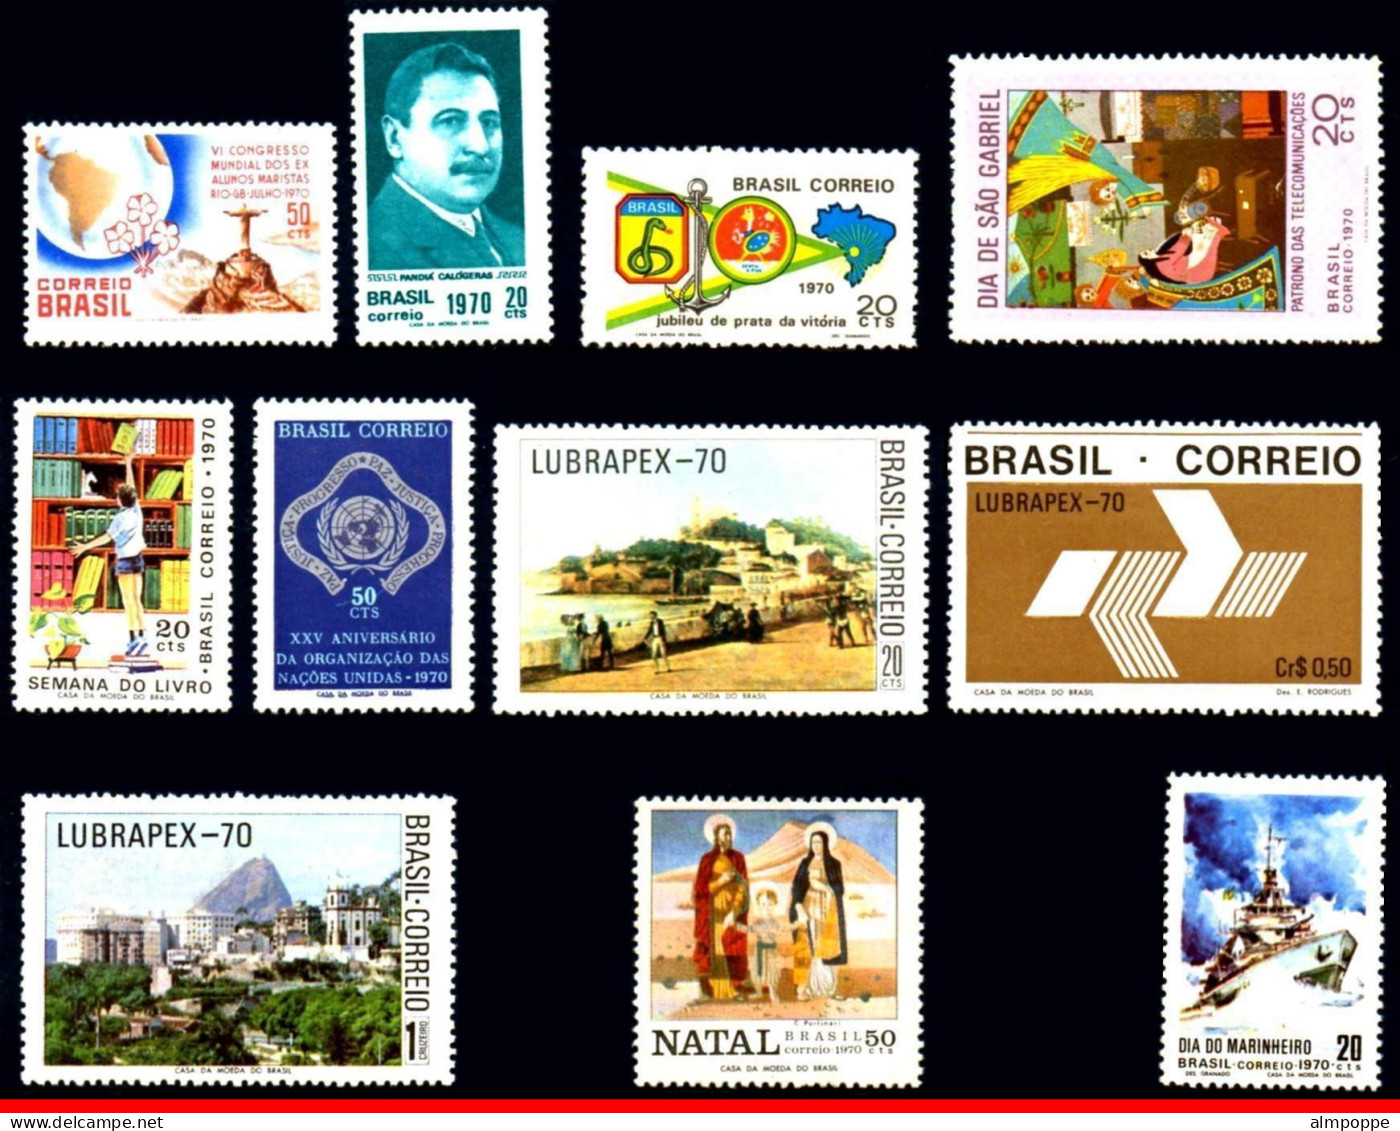 Ref. BR-Y1970-S BRAZIL 1970 - ALL COMMEMORATIVE STAMPSOF THE YEAR, SCOTT VALUE $66.80, ALL MNH, . 28V Sc# 1141A~1182 - Annate Complete